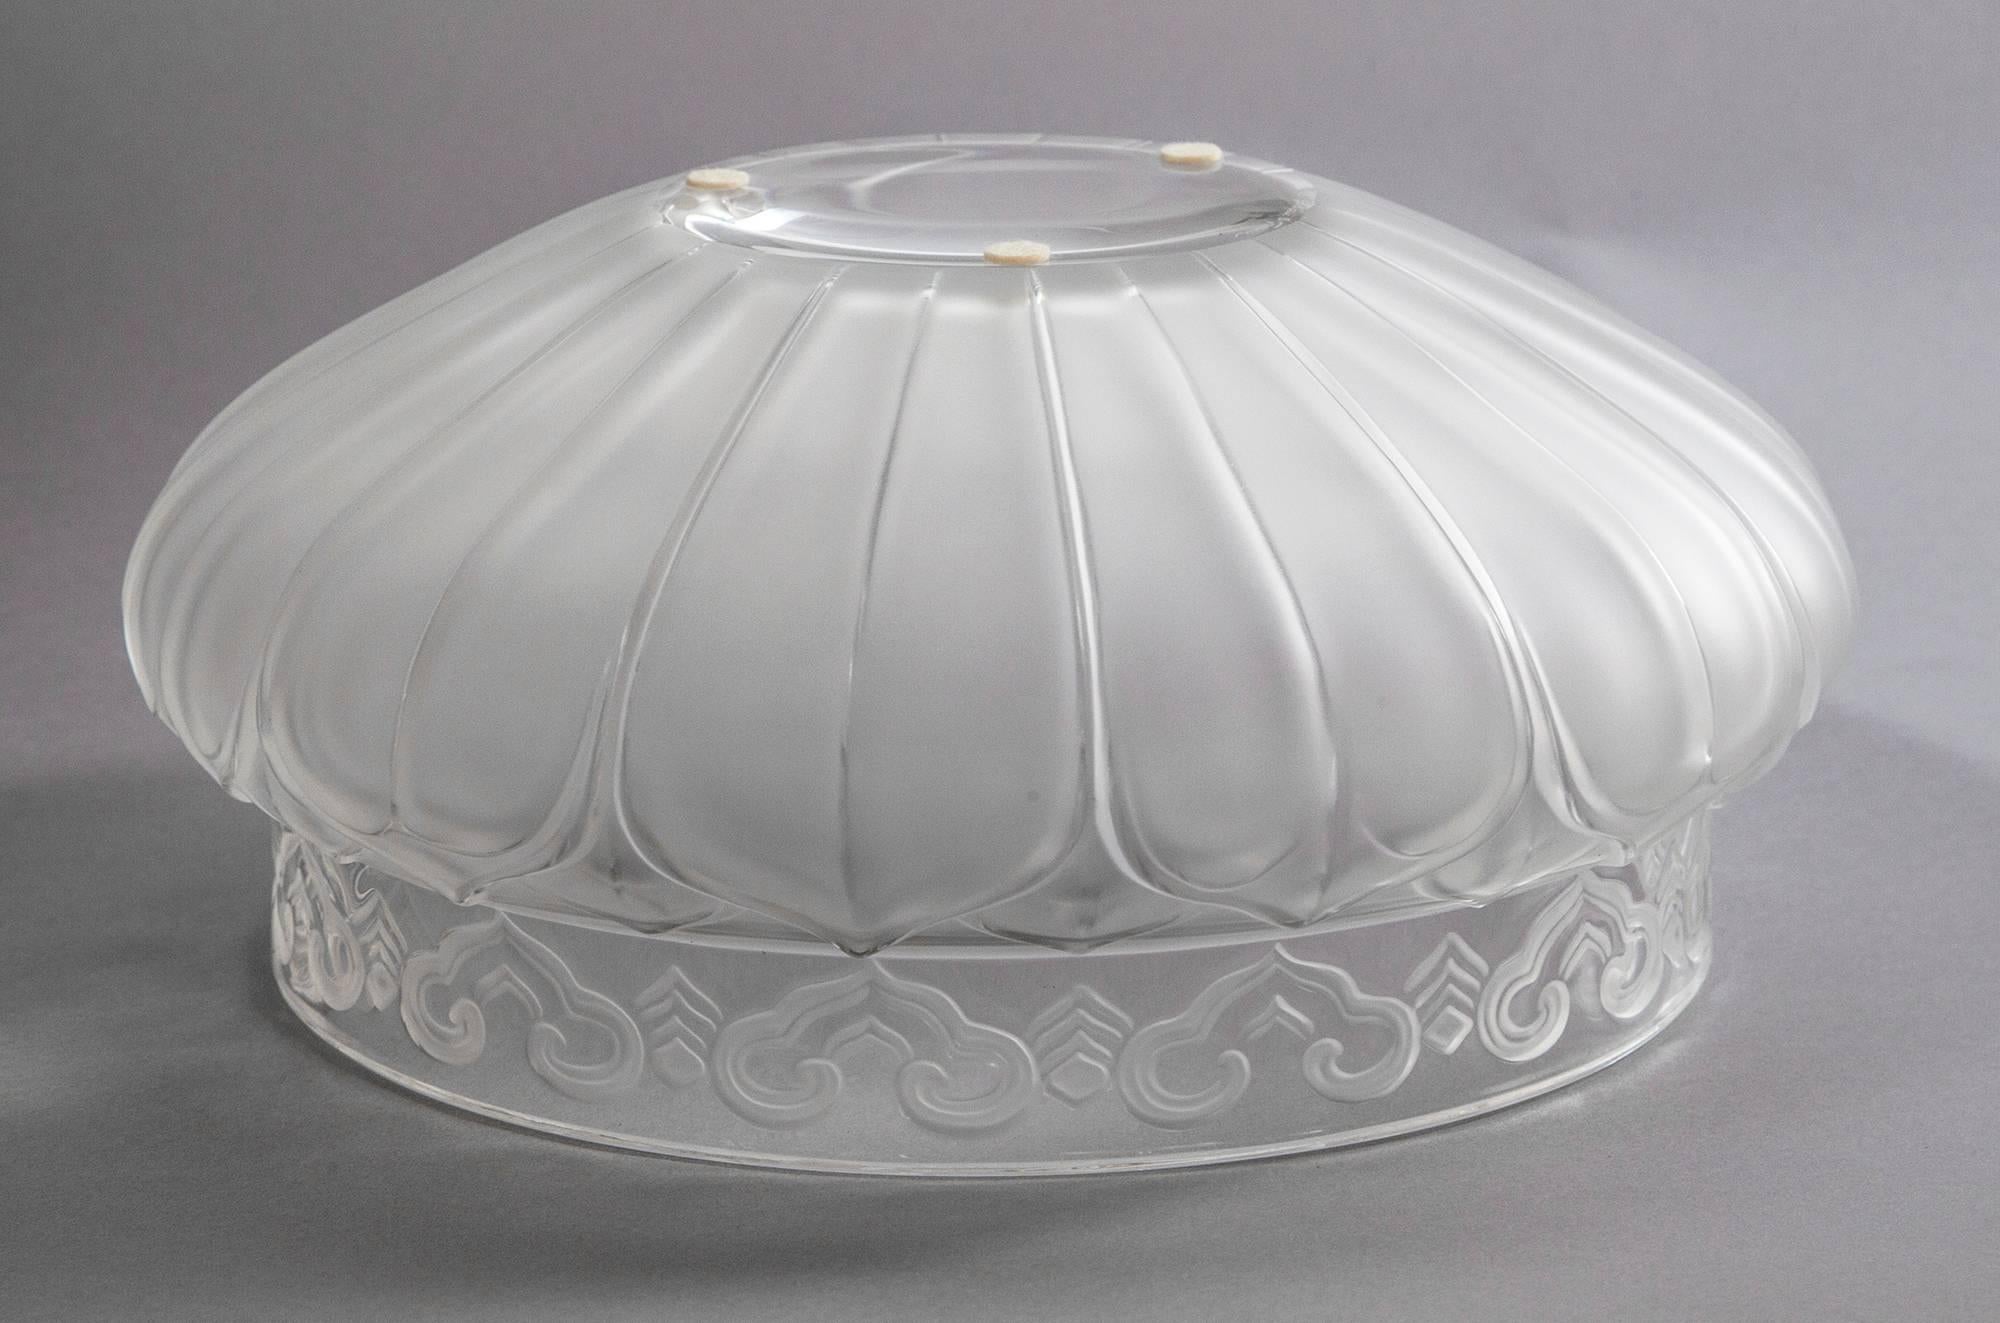 Beautiful Lalique centerpiece bowl in frosted crystal with clear rim and base, embellished with Arabesques and Volutes. Script signature: Lalique France, on base, and Lalique Paris sticker on rim. Sold with original presentation box.